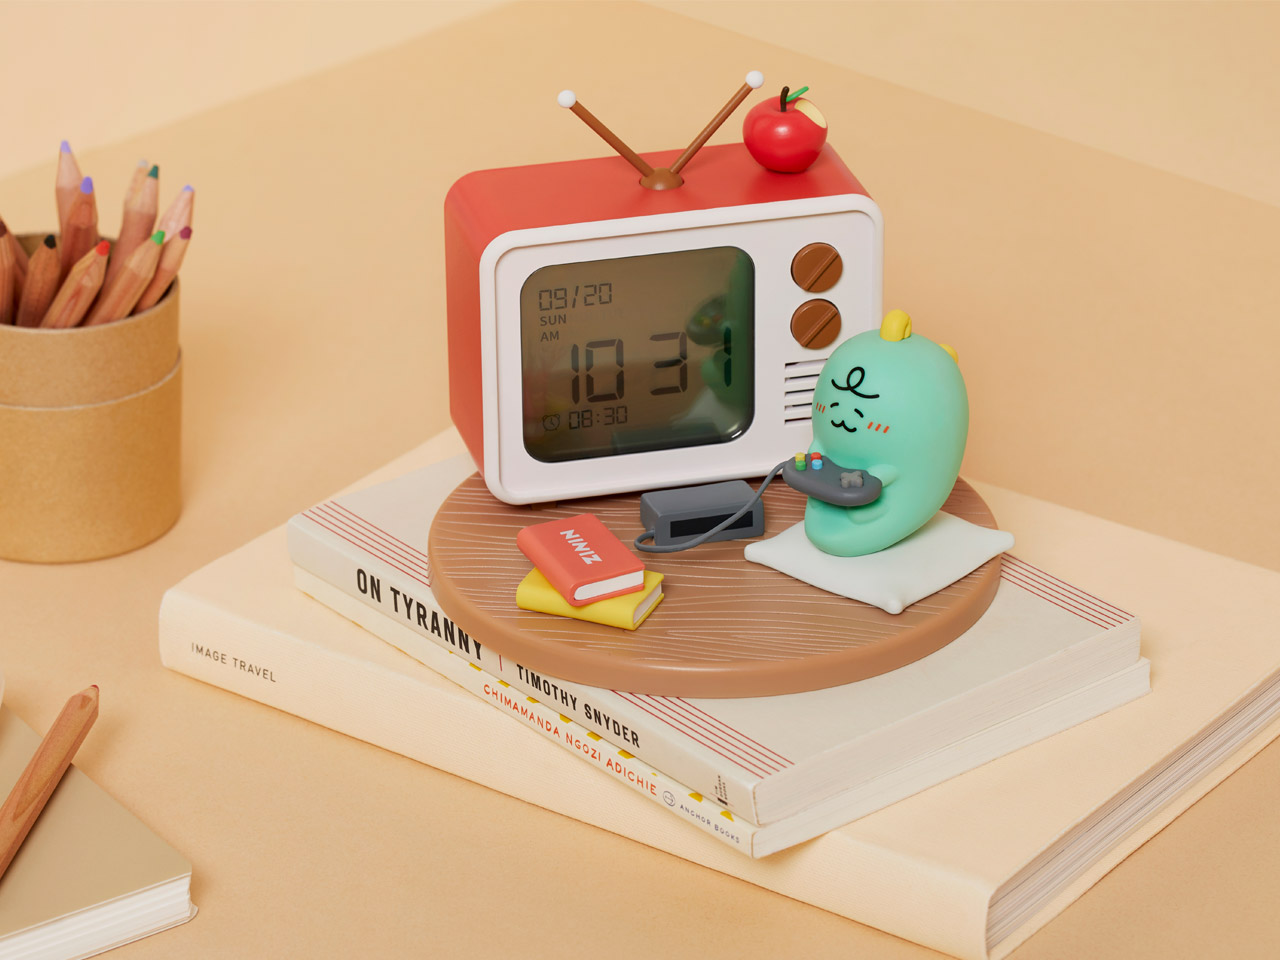 Kakao friends desk clock available on Now in Seoul